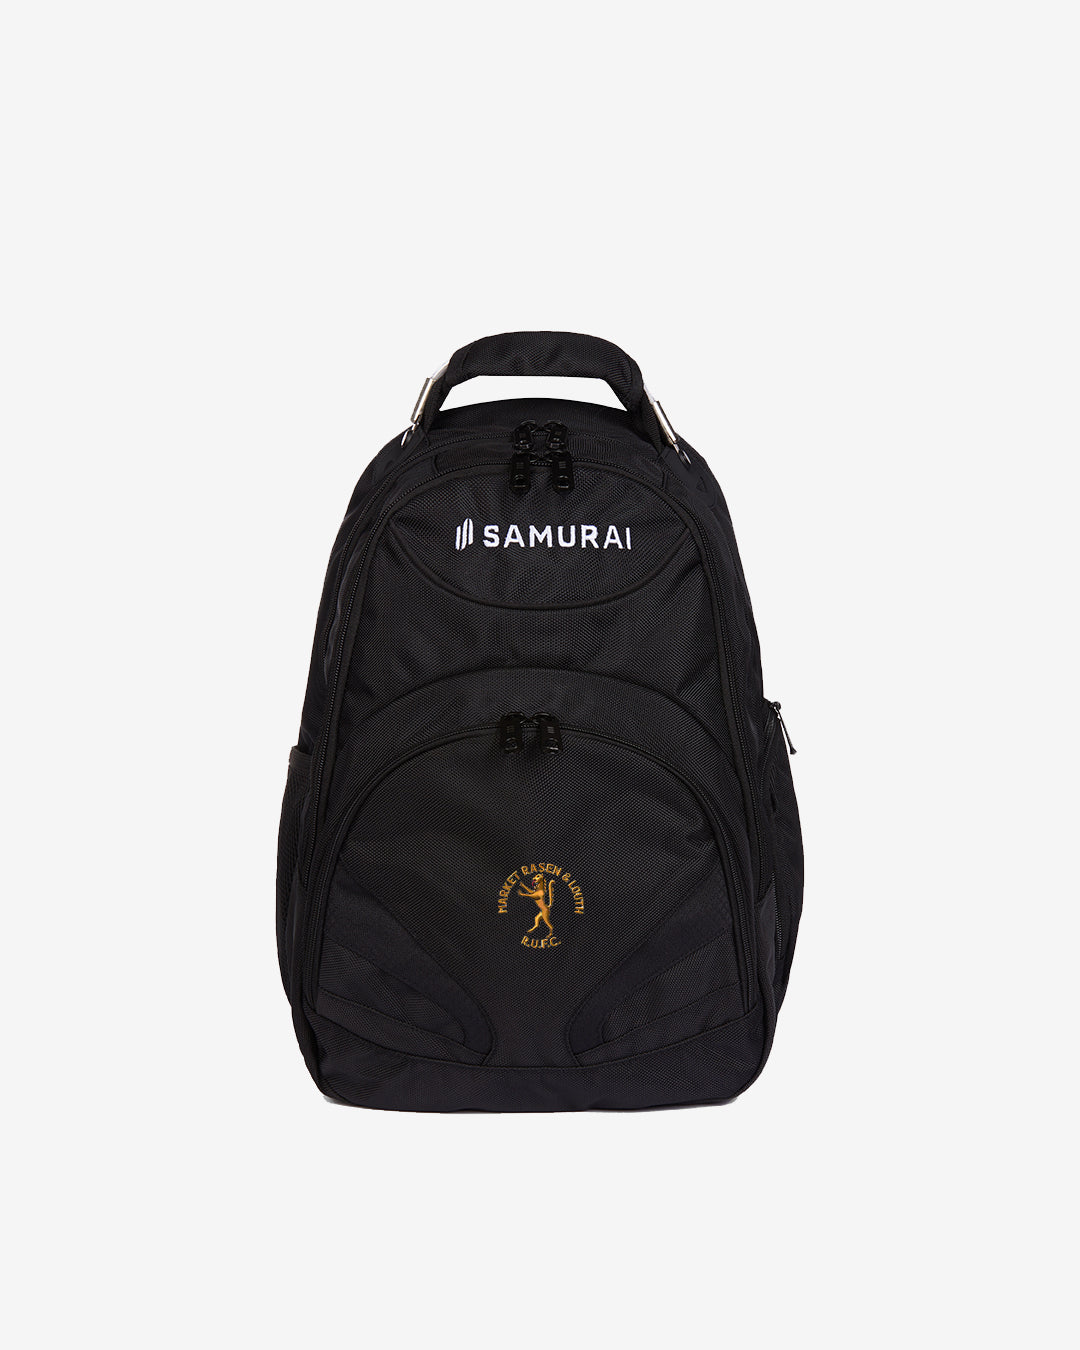 Market Rasen and Louth RUFC - U:0213 - Backpack - Black